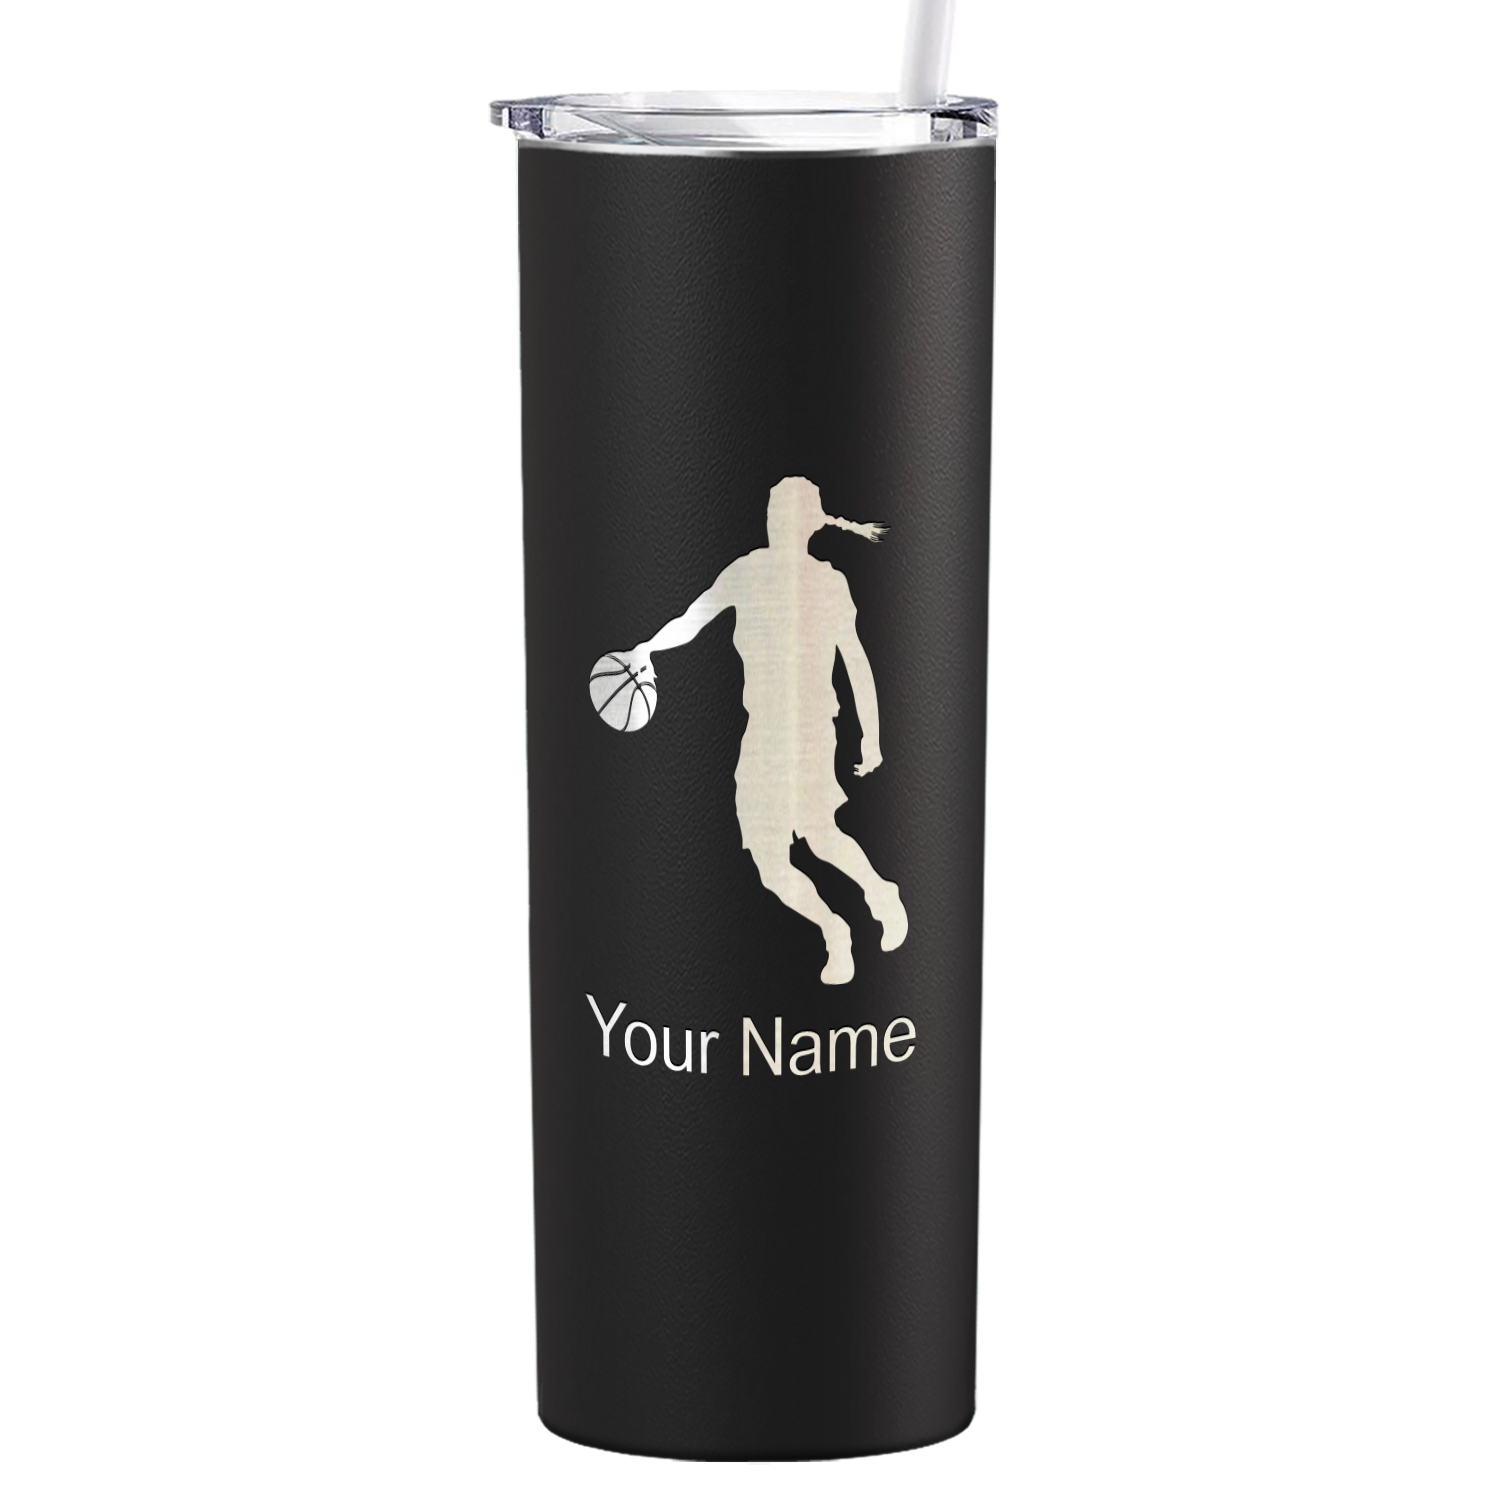 Personalized Basketball Girl Player Silhouette on 20oz Skinny Tumbler